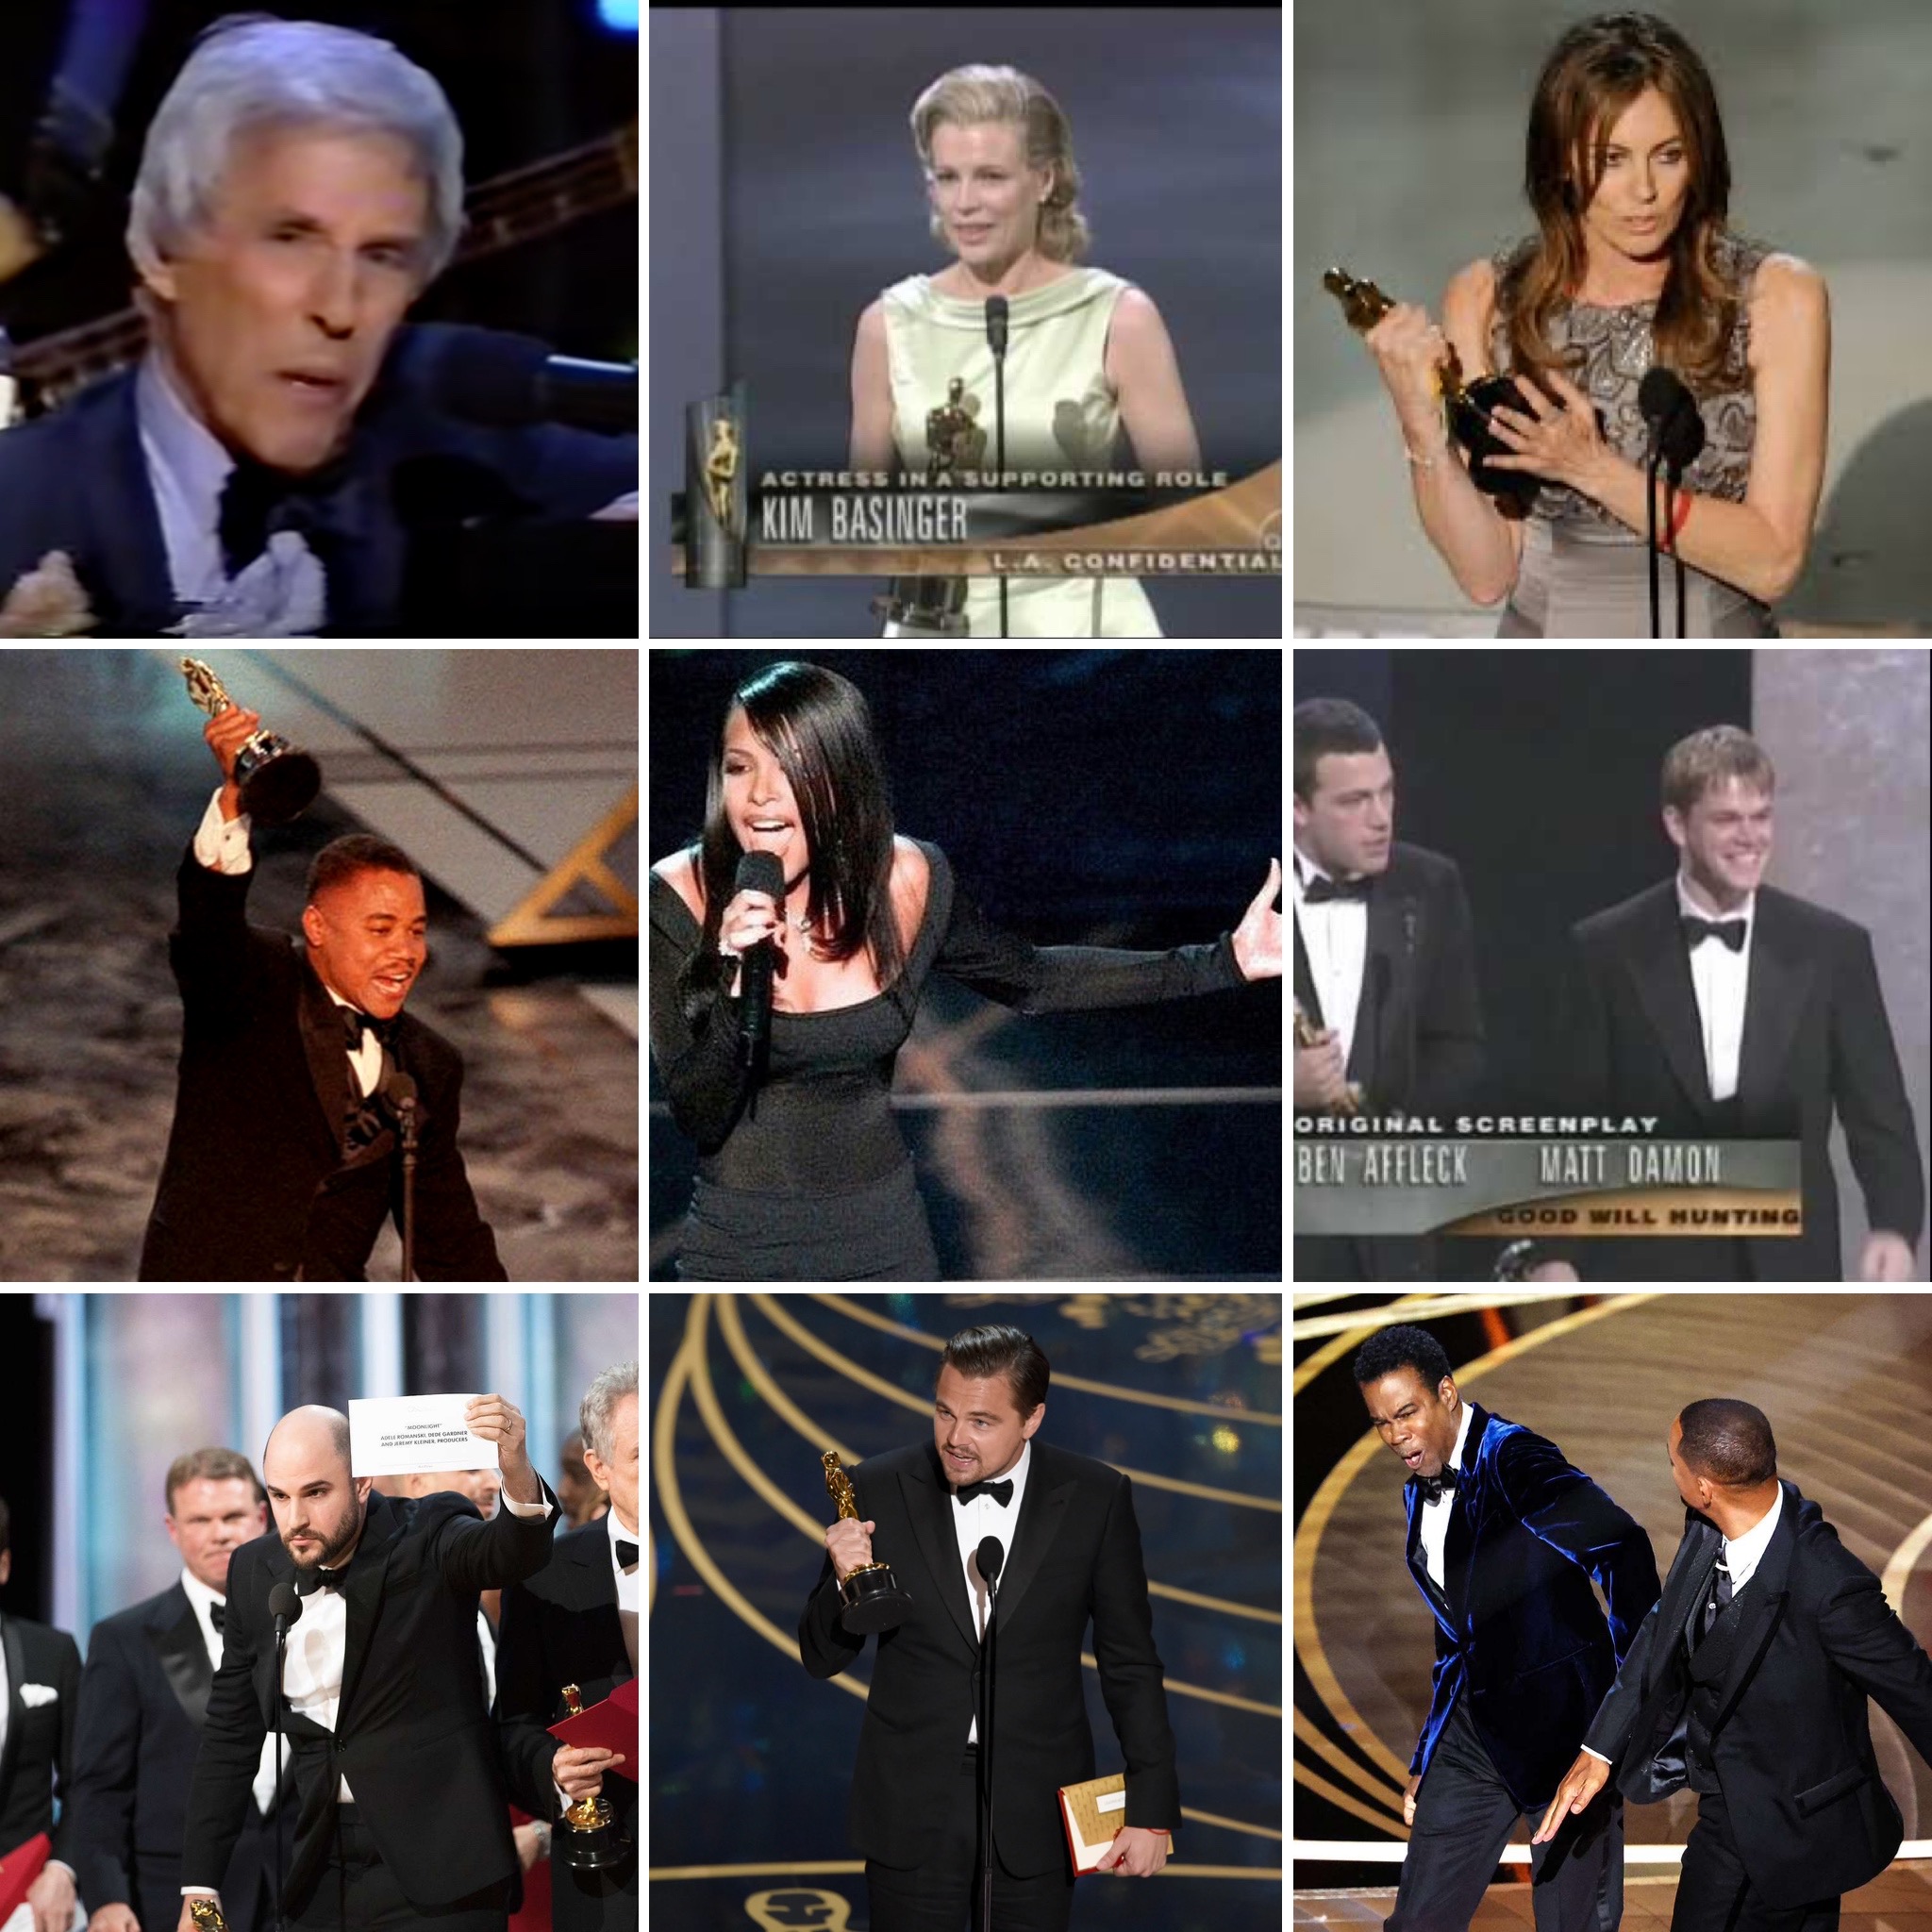 Some Oscar Moments of the past that include: Burt Bacharach and several renowned musicians complete a medley of some of the Best Original Song nominees, Kim Basinger wins the Oscar for Best Supporting Actress, Kathryn Bigelow wins the Oscar for Best Director, Cuba Gooding Jr. wins the Oscar for Best Supporting Actor, Aaliyah performs at the Oscars shortly before her death in a plane crash, Ben Affleck and Matt Damon win the Oscar for Best Original Screenplay, Envelopegate, where "La La Land" was mispronounced as the Best Picture winner, when it was in fact, "Moonlight," Leonardo Dicaprio finally wins an Oscar for Leading Actor after several nominations and many snubs, and the slap heard around the world, Will Smith slaps Chris Rock onstage at the Oscars over a joke about his wife, Jada Pinkett Smith. Photo Credit: The Academy of Motion Picture Arts and Sciences